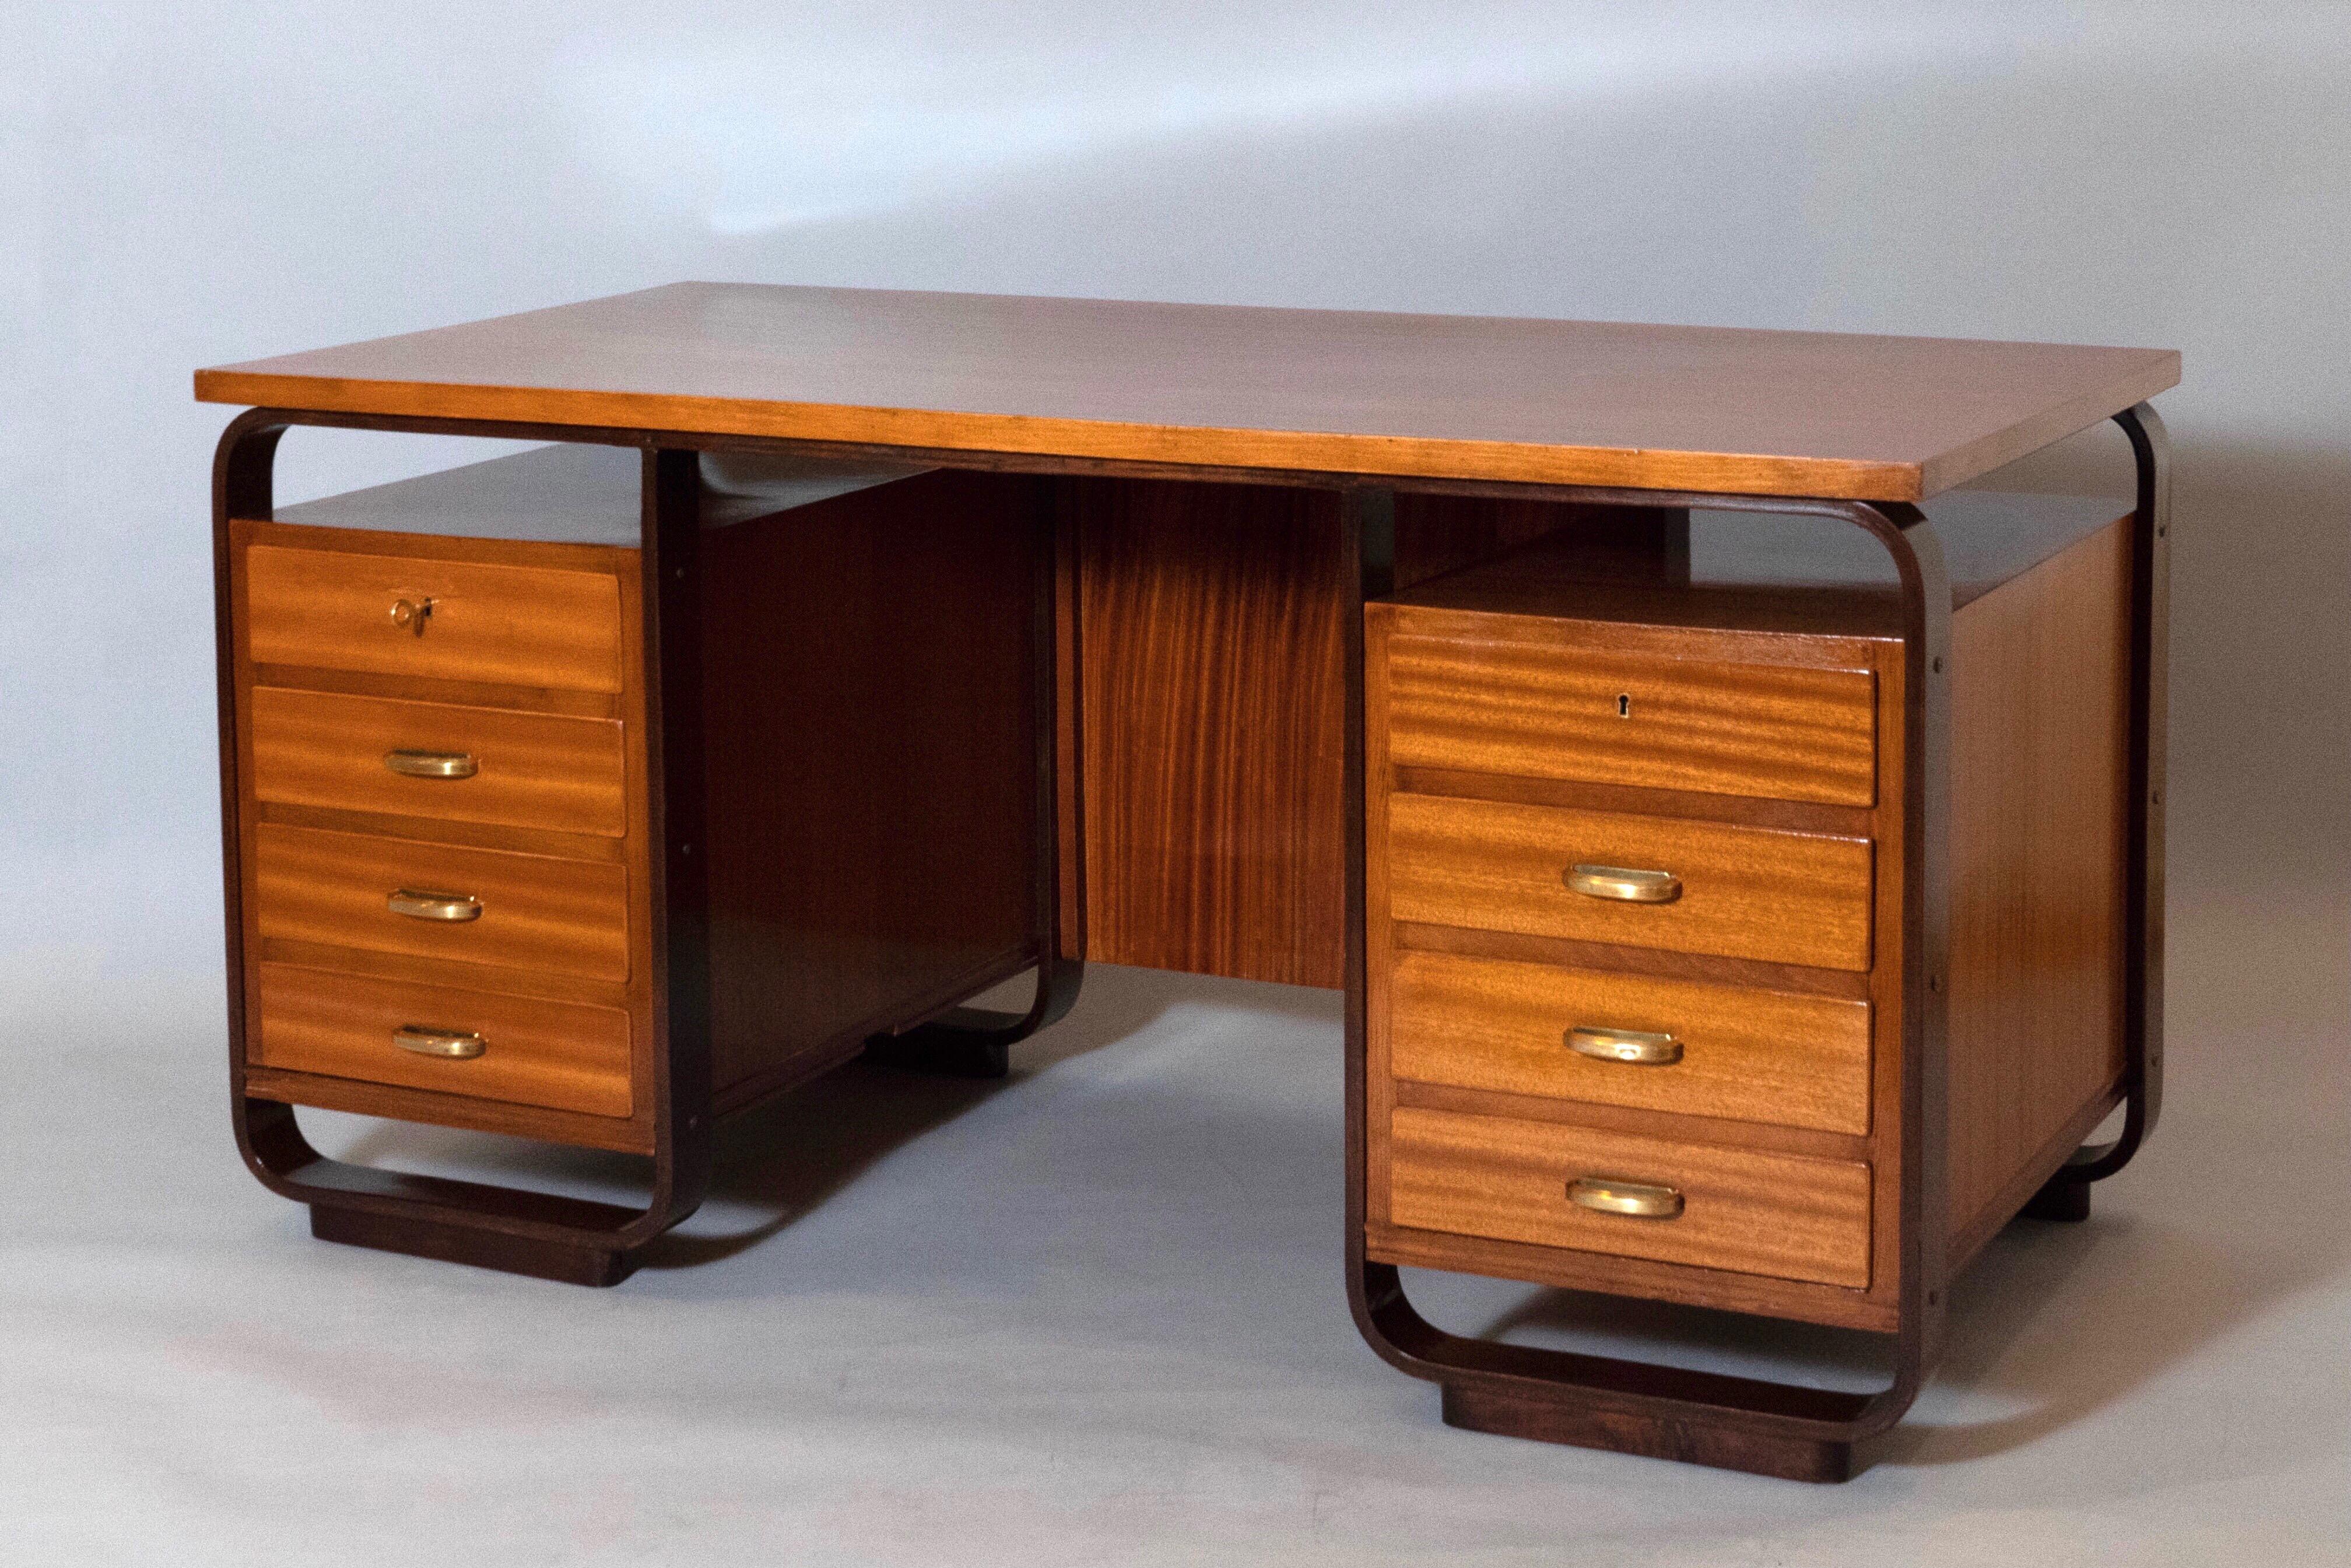 Giuseppe Pagano (1896 - 1945) 

An imposing eight-drawer desk by rationalist architect and designer Giuseppe Pagano, in fruitwood with mahogany-stained trim and polished brass handles. 

Italy, 1940.